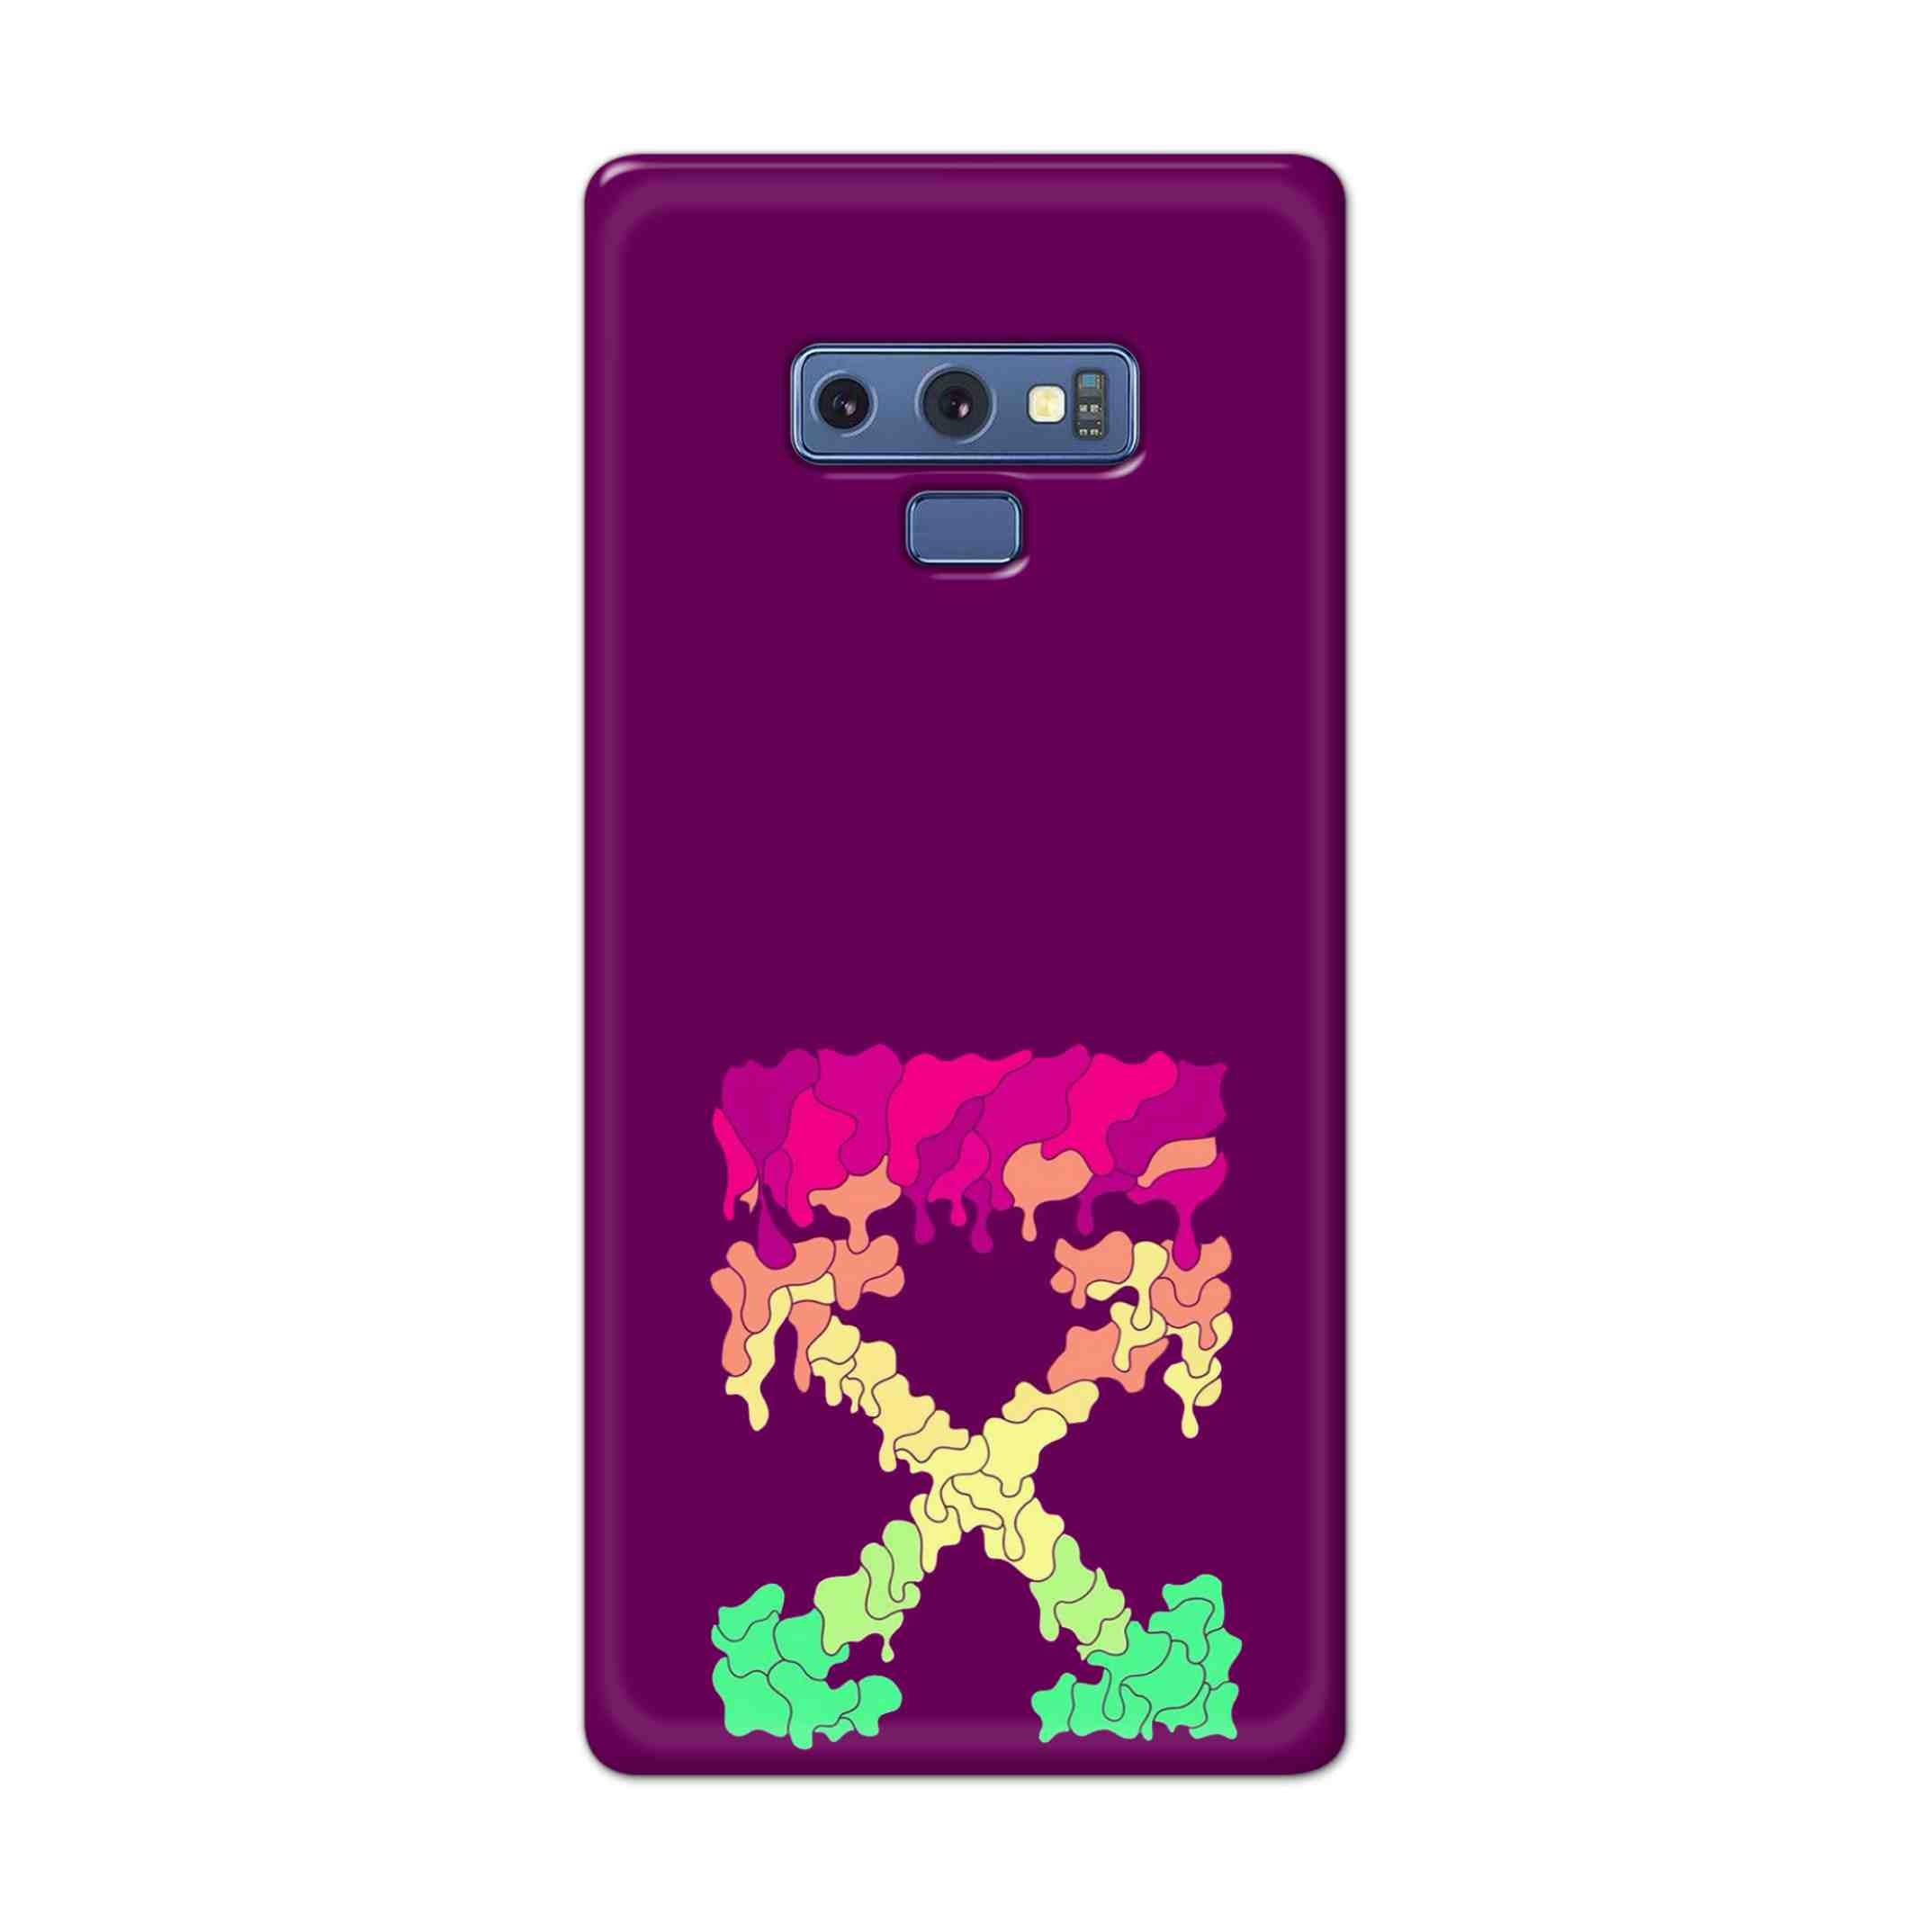 Buy X.O Hard Back Mobile Phone Case Cover For Samsung Galaxy Note 9 Online